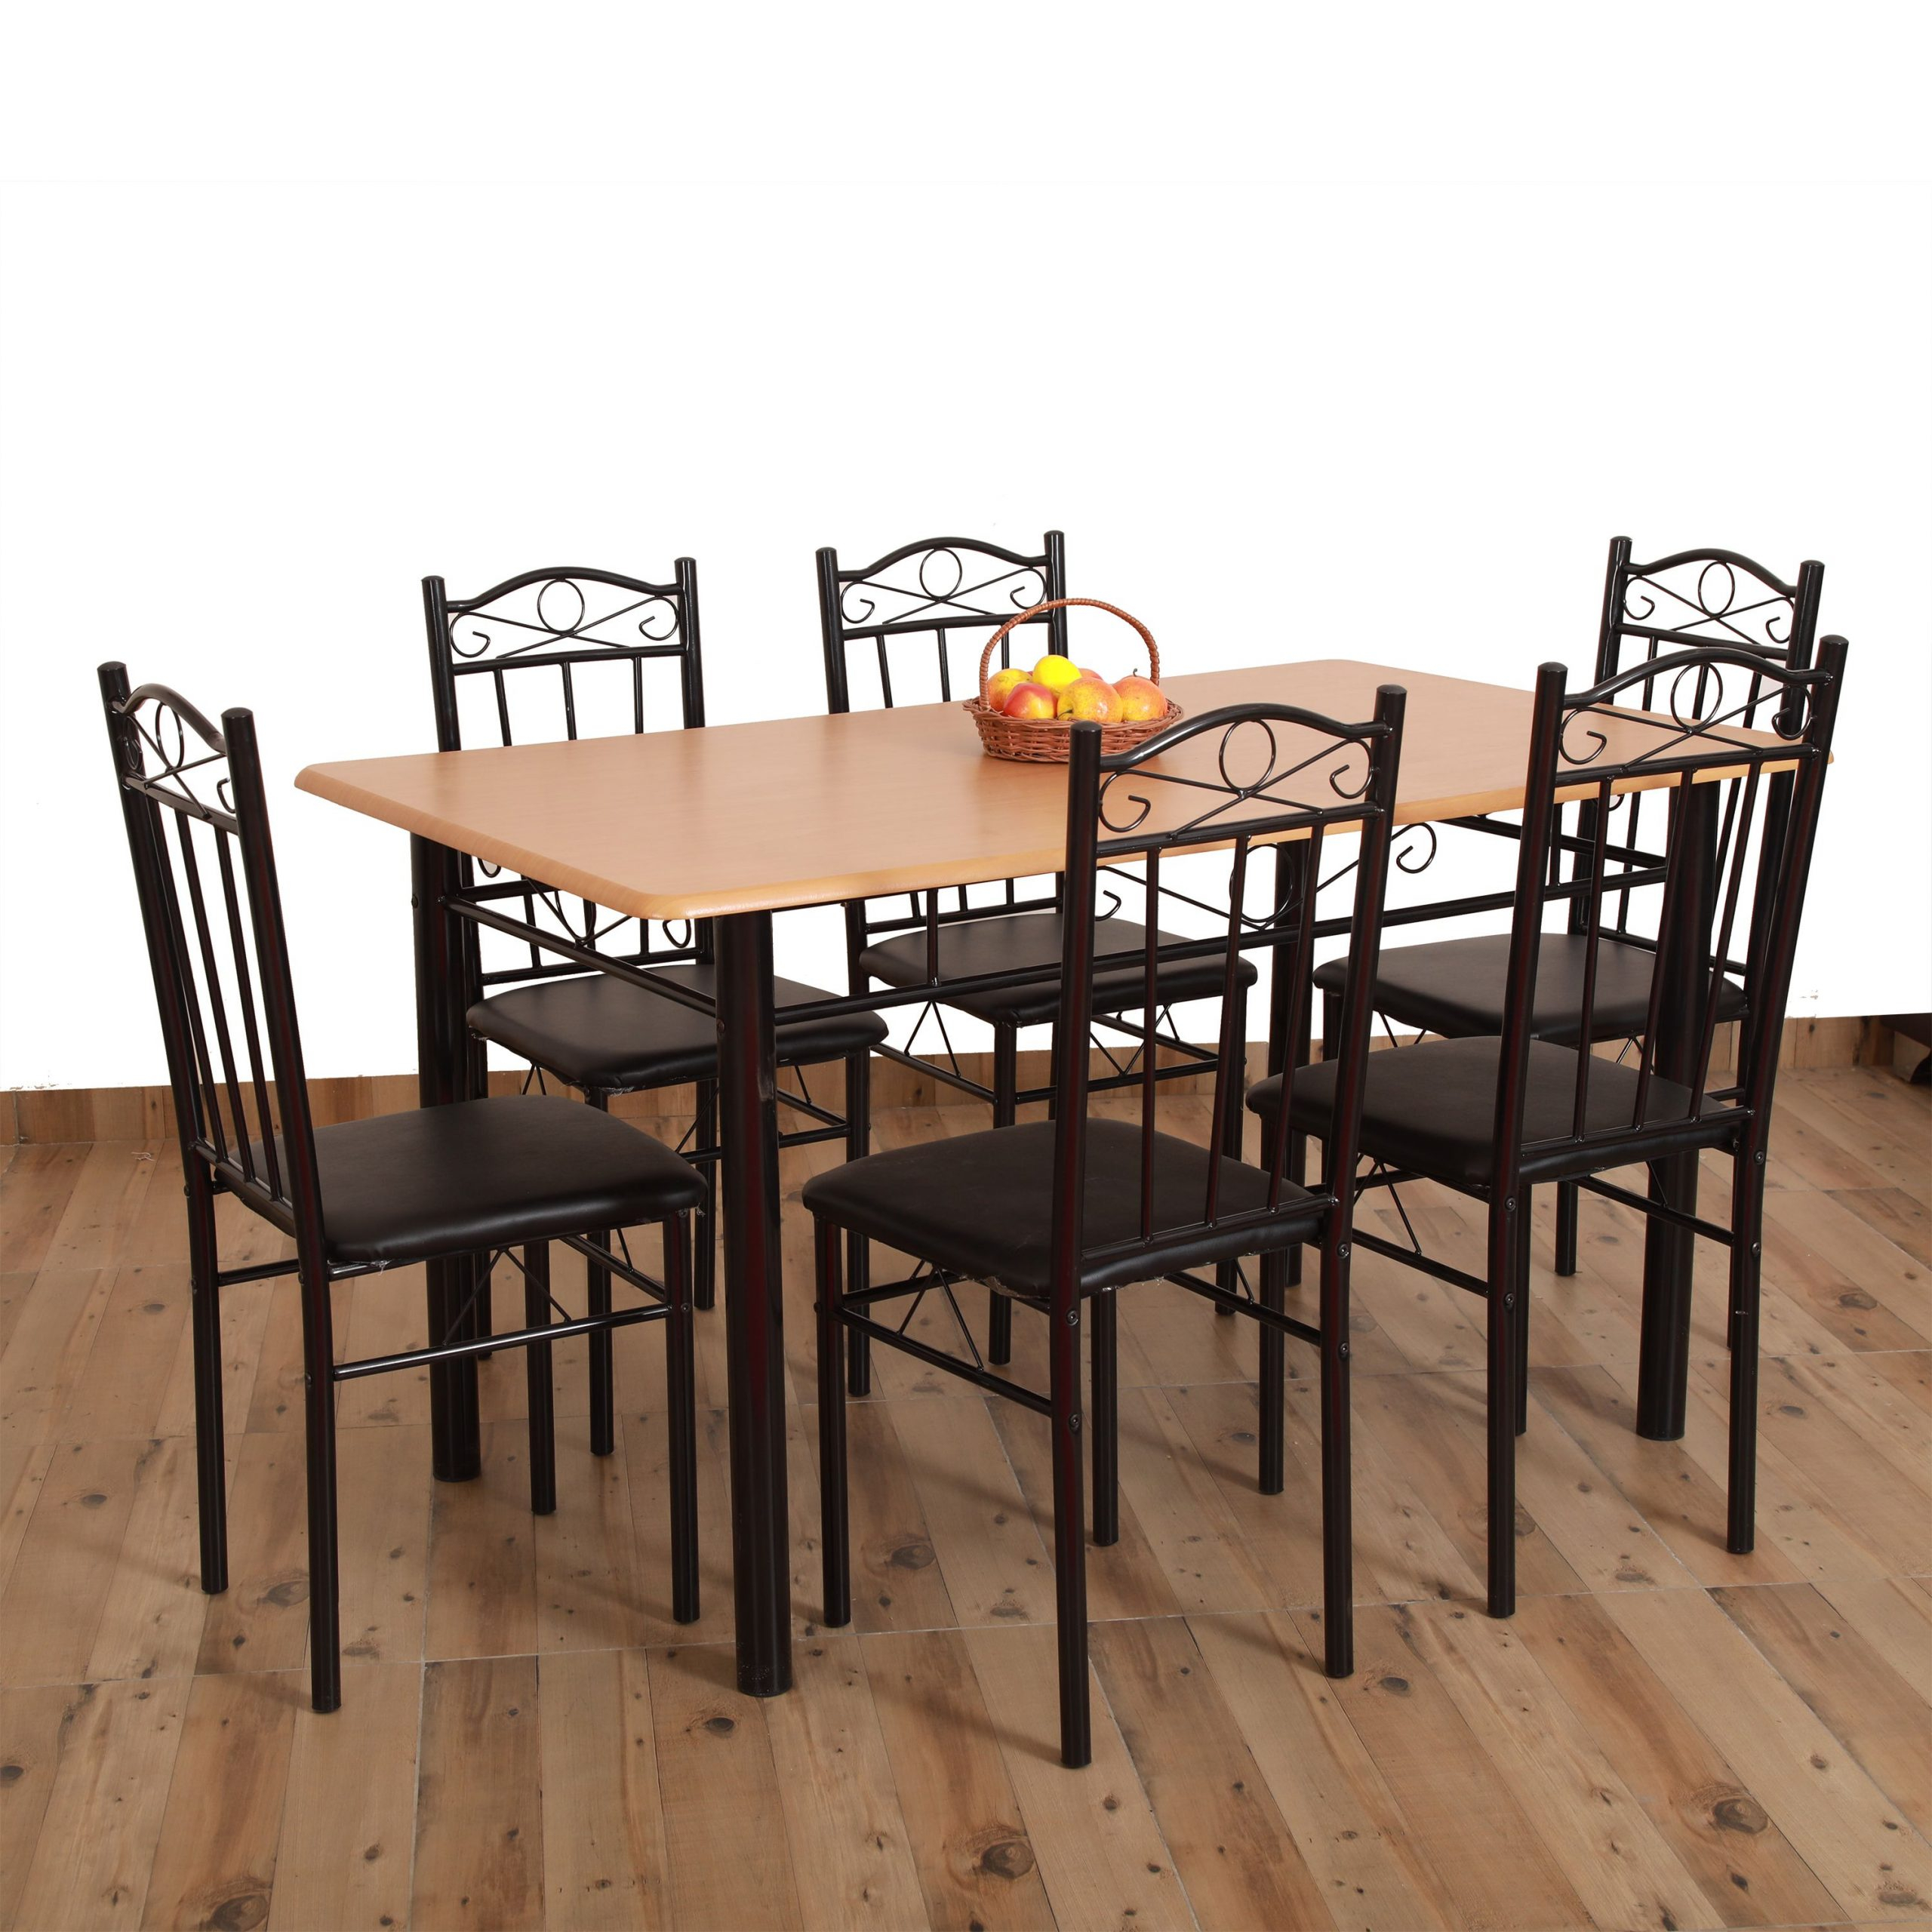 Dining Room Chair Seater Dining Table And Chairs Set Below throughout sizing 2560 X 2560